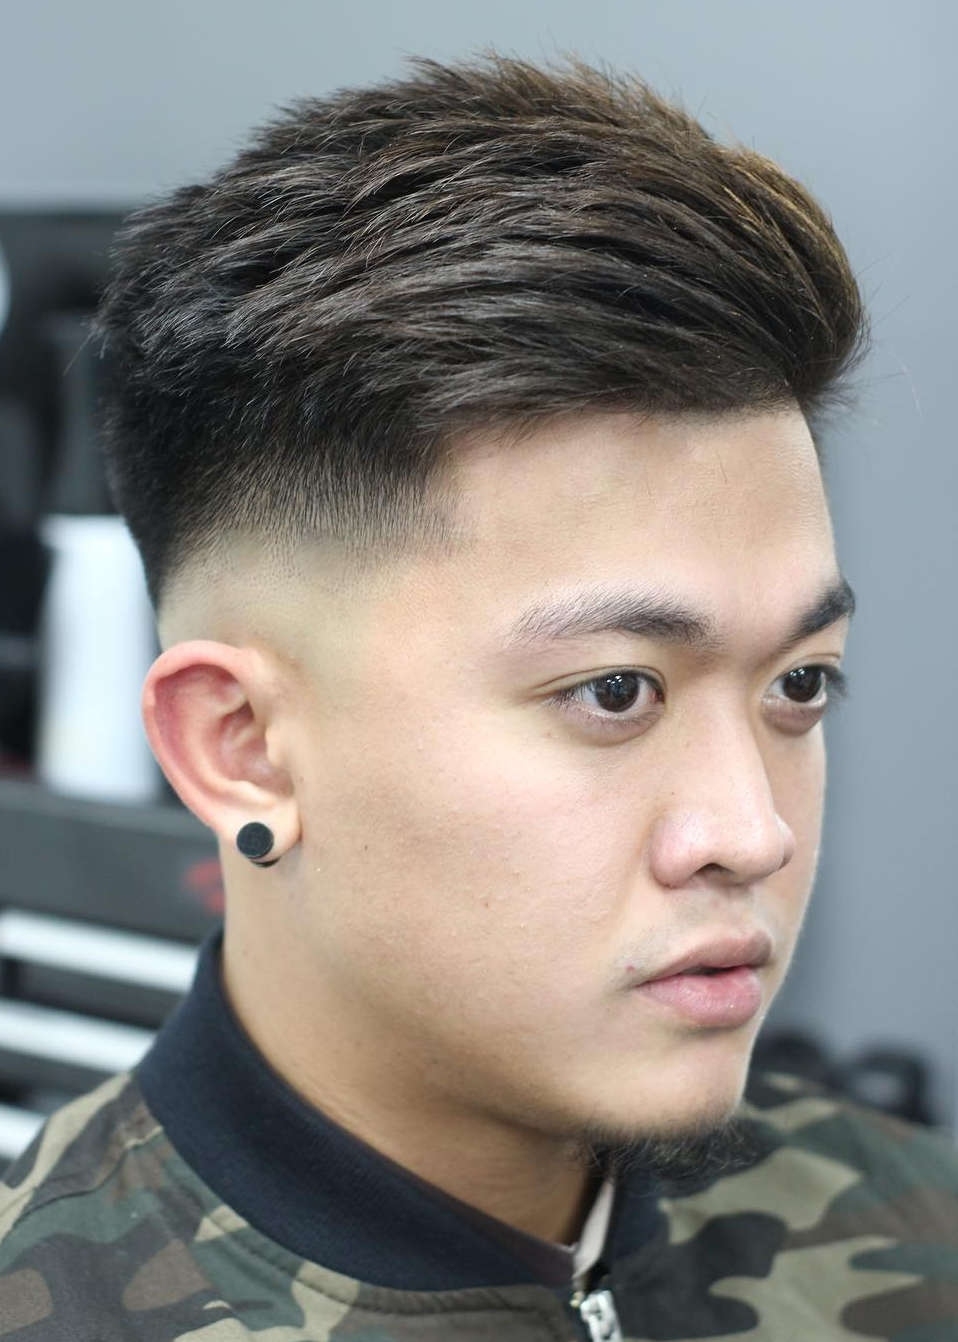 25 Asian Men Hairstyles- Style Up With The Avid Variety Of in Superb Asian Short Hairstyles 2019